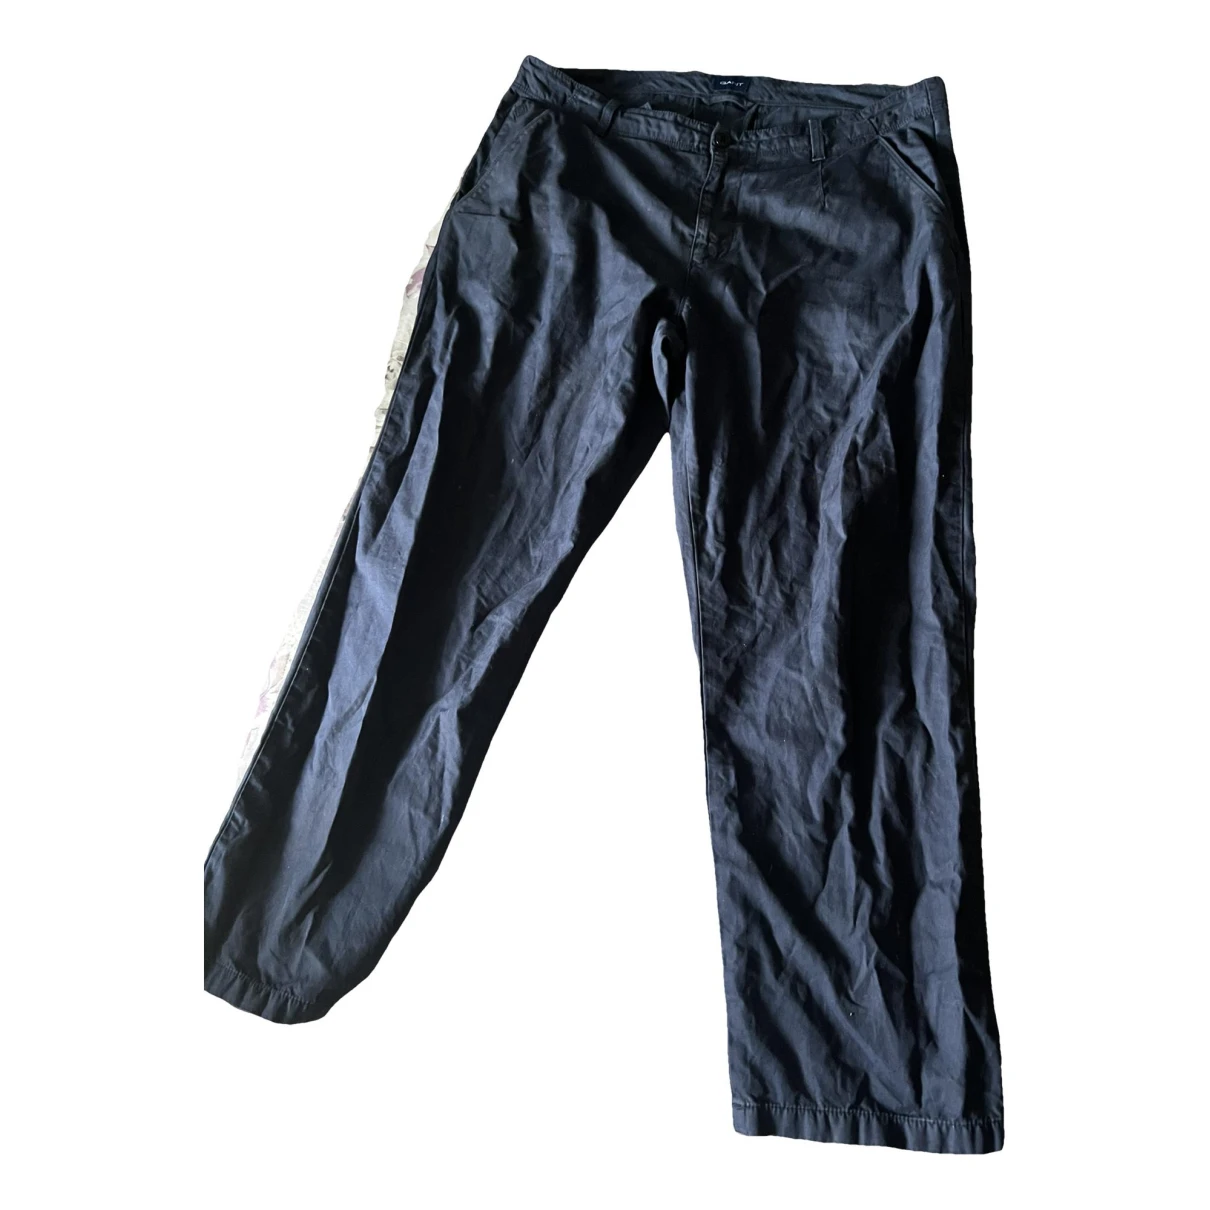 Pre-owned Gant Trousers In Navy